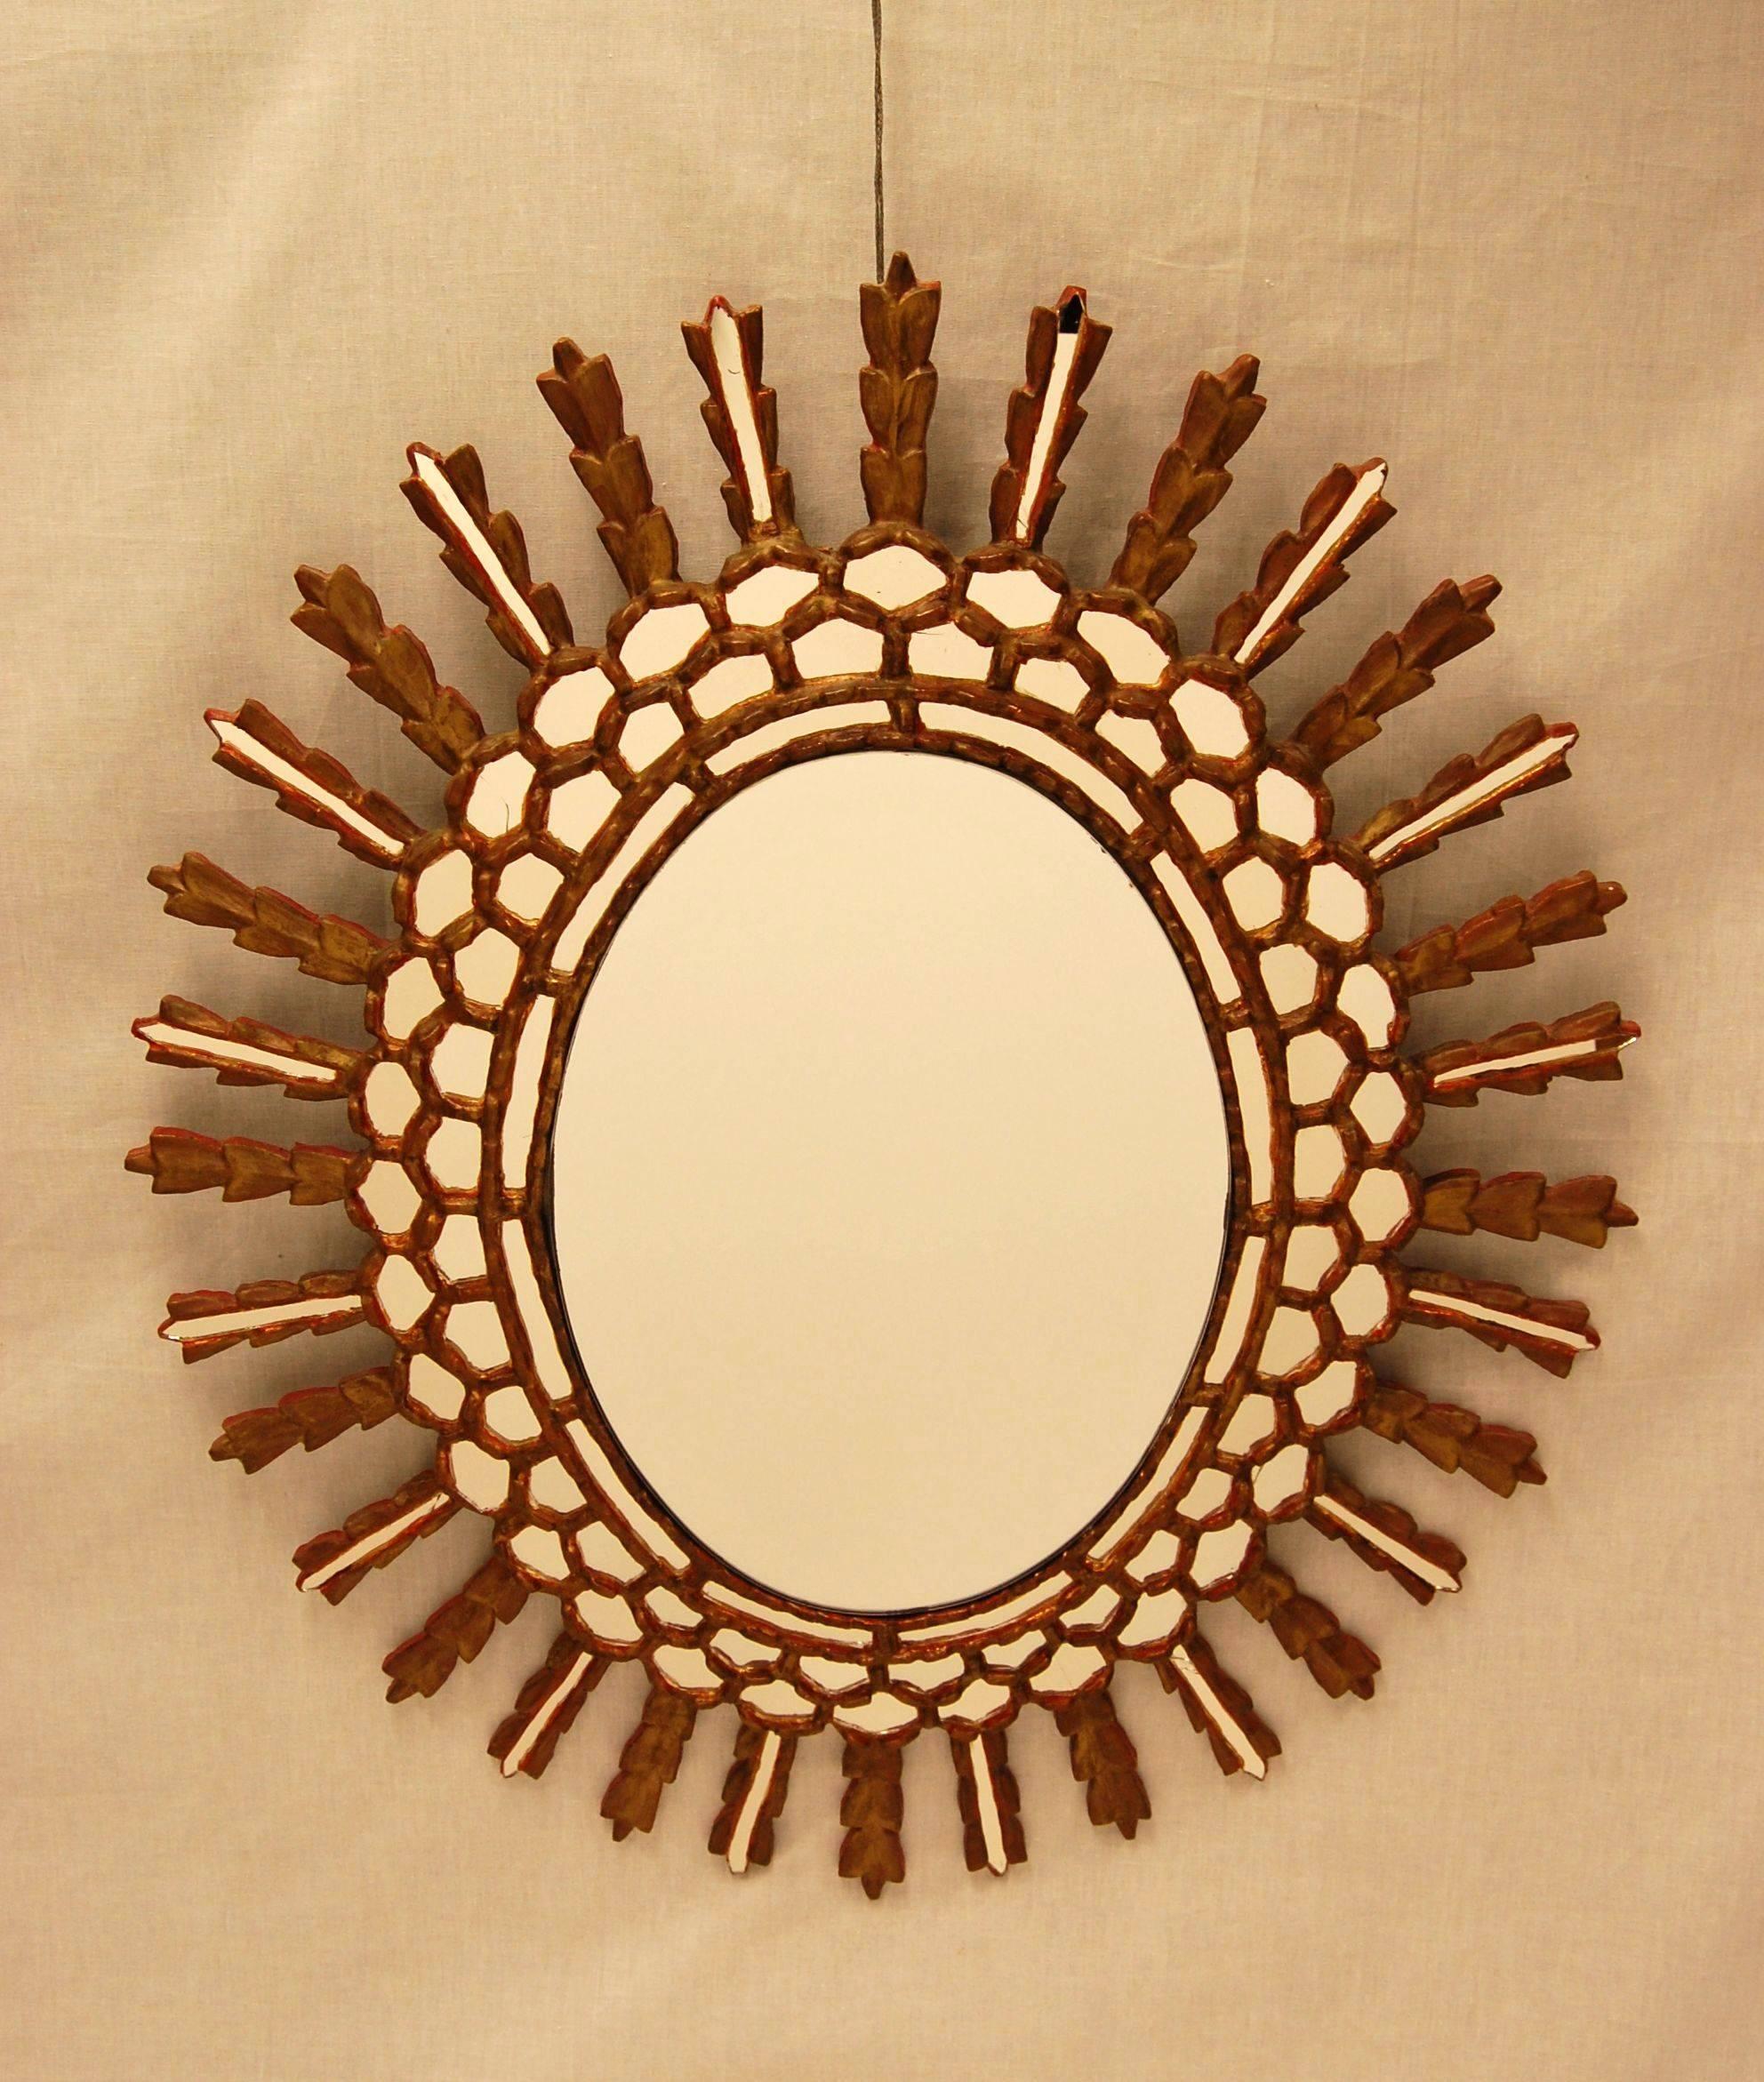 1950s oval mirror in excellent condition with newer beveled center glass. All surrounding pieces of mirror are original.